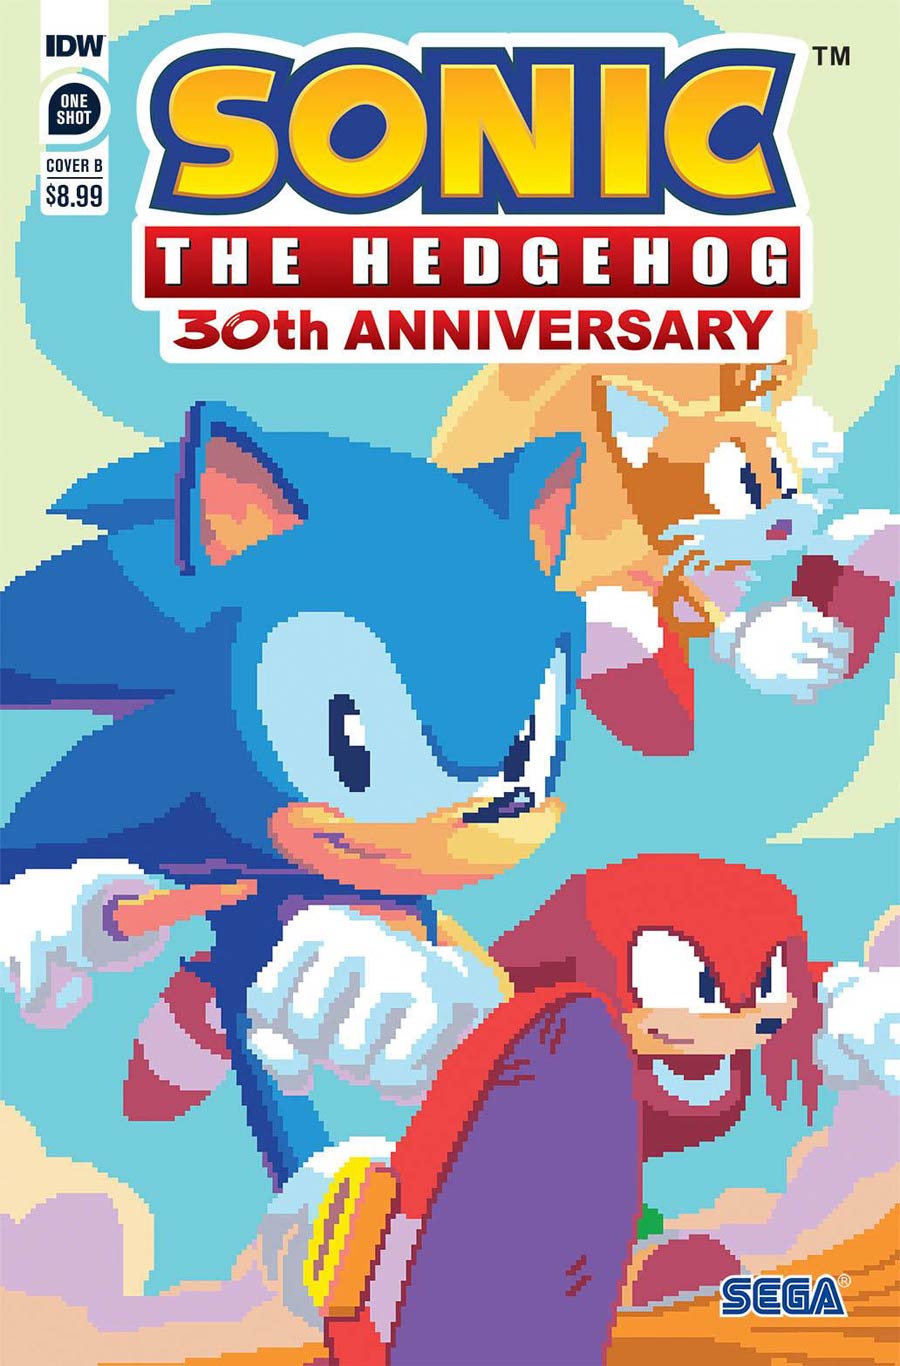 Sonic The Hedgehog 30th Anniversary Special Cover B Variant Christina-Antoinette Neofotistou Cover